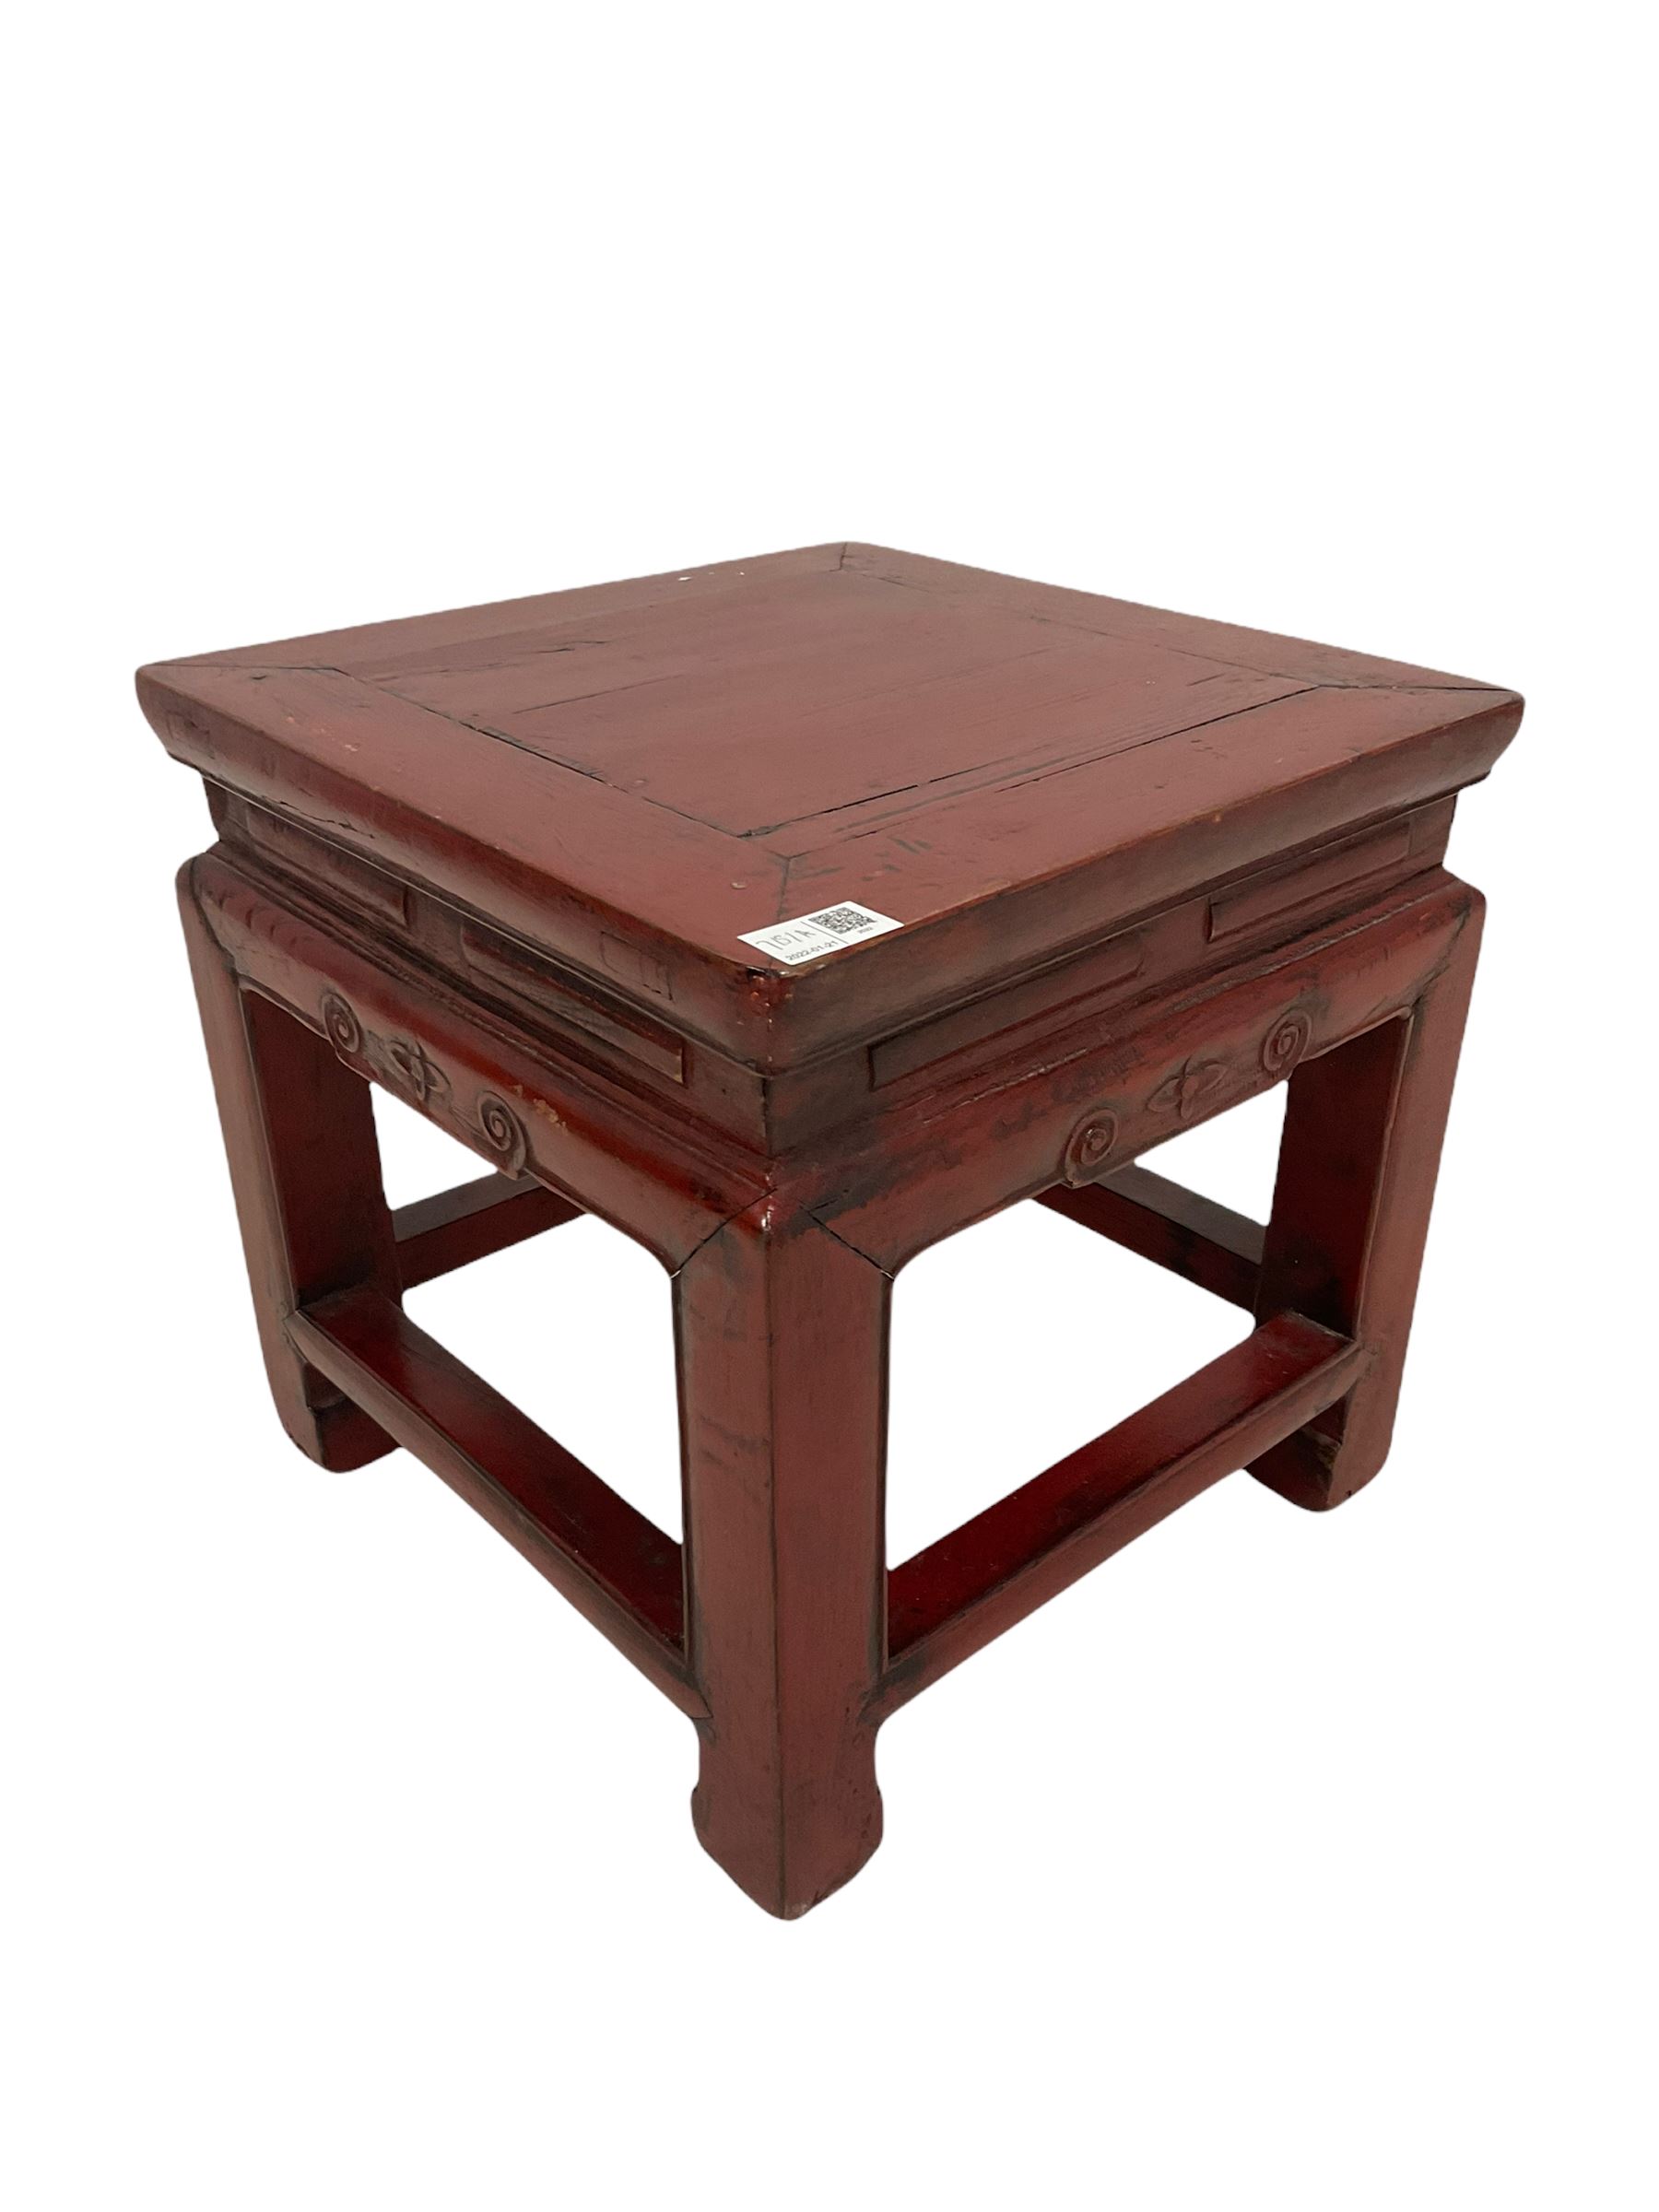 Chinese occasional table in 'sealing wax' red - Image 2 of 3